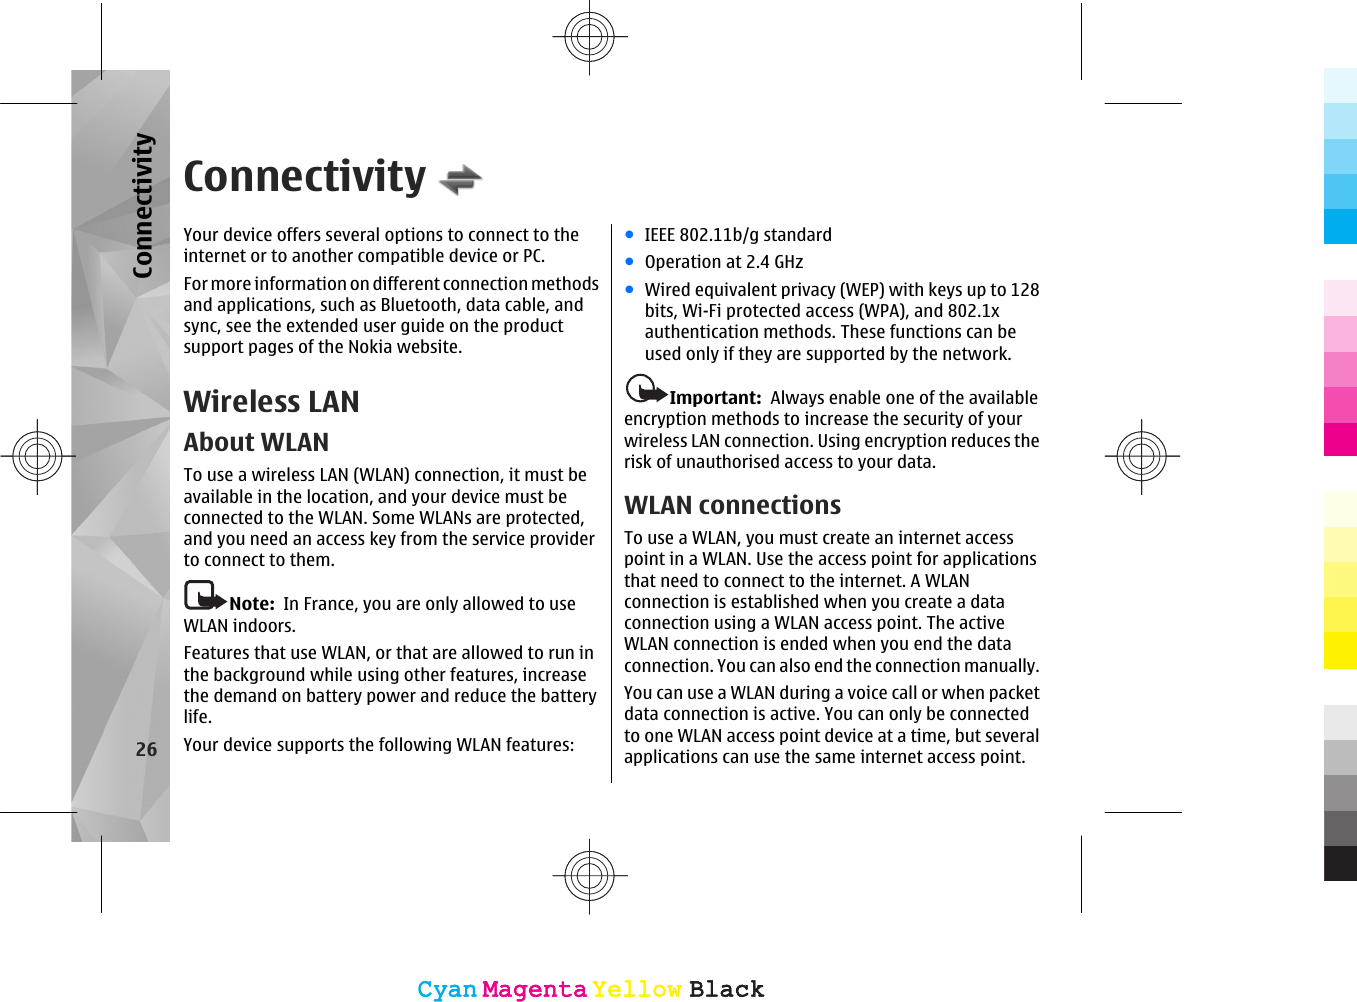 ConnectivityYour device offers several options to connect to theinternet or to another compatible device or PC.For more information on different connection methodsand applications, such as Bluetooth, data cable, andsync, see the extended user guide on the productsupport pages of the Nokia website.Wireless LANAbout WLANTo use a wireless LAN (WLAN) connection, it must beavailable in the location, and your device must beconnected to the WLAN. Some WLANs are protected,and you need an access key from the service providerto connect to them.Note:  In France, you are only allowed to useWLAN indoors.Features that use WLAN, or that are allowed to run inthe background while using other features, increasethe demand on battery power and reduce the batterylife.Your device supports the following WLAN features:●IEEE 802.11b/g standard●Operation at 2.4 GHz●Wired equivalent privacy (WEP) with keys up to 128bits, Wi-Fi protected access (WPA), and 802.1xauthentication methods. These functions can beused only if they are supported by the network.Important:  Always enable one of the availableencryption methods to increase the security of yourwireless LAN connection. Using encryption reduces therisk of unauthorised access to your data.WLAN connectionsTo use a WLAN, you must create an internet accesspoint in a WLAN. Use the access point for applicationsthat need to connect to the internet. A WLANconnection is established when you create a dataconnection using a WLAN access point. The activeWLAN connection is ended when you end the dataconnection. You can also end the connection manually.You can use a WLAN during a voice call or when packetdata connection is active. You can only be connectedto one WLAN access point device at a time, but severalapplications can use the same internet access point.26ConnectivityCyanCyanMagentaMagentaYellowYellowBlackBlackCyanCyanMagentaMagentaYellowYellowBlackBlack